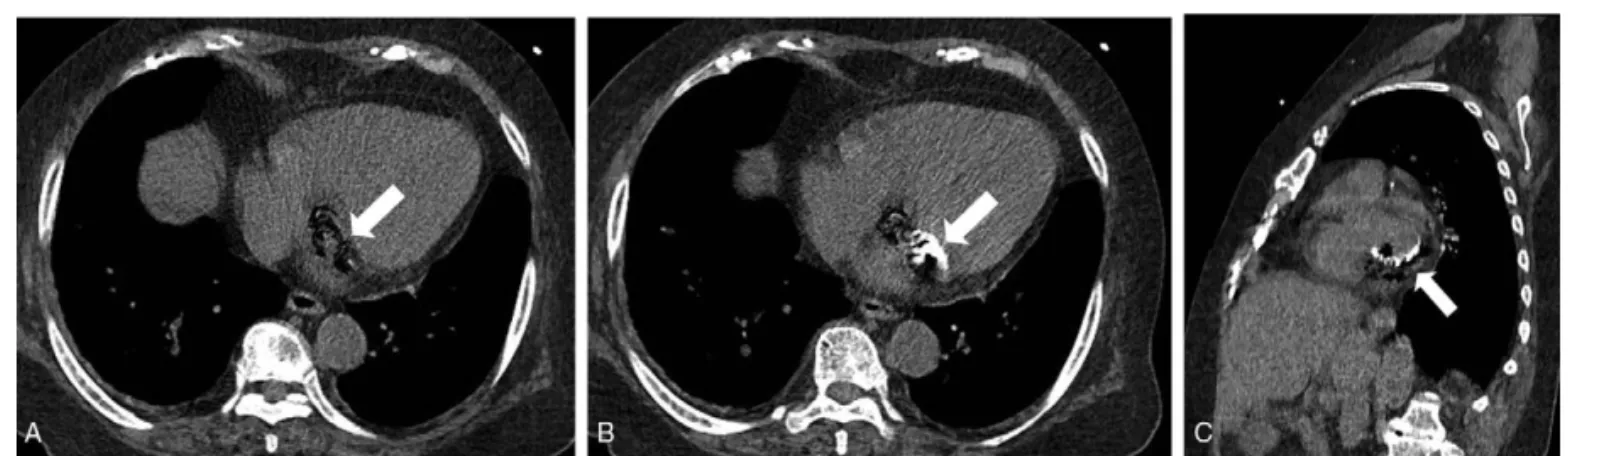 Figure 1. Noncontrast-enhanced axial (A and B) and short-axis cardiac (C) CT images revealing abnormal air bubbles surrounding the calciﬁed mitral valve annulus (arrows)